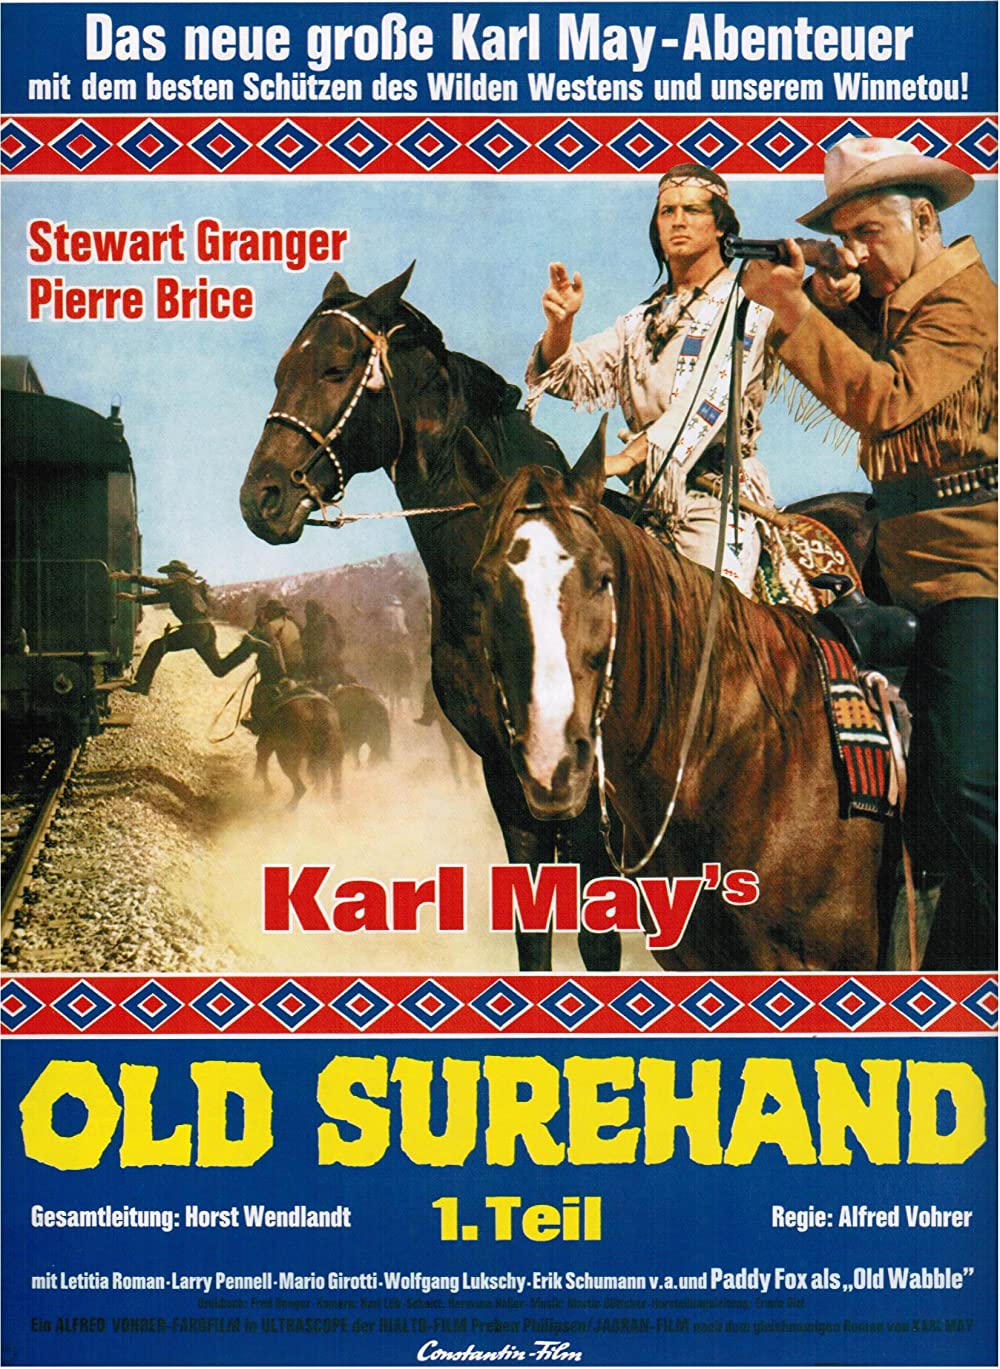 "Old Shurehand 1.Teil - 1965- in 4K-UHD, remastered, 200% Upscale, 3840x2160 Px.  1962 - 1966."Winnetou Collection.